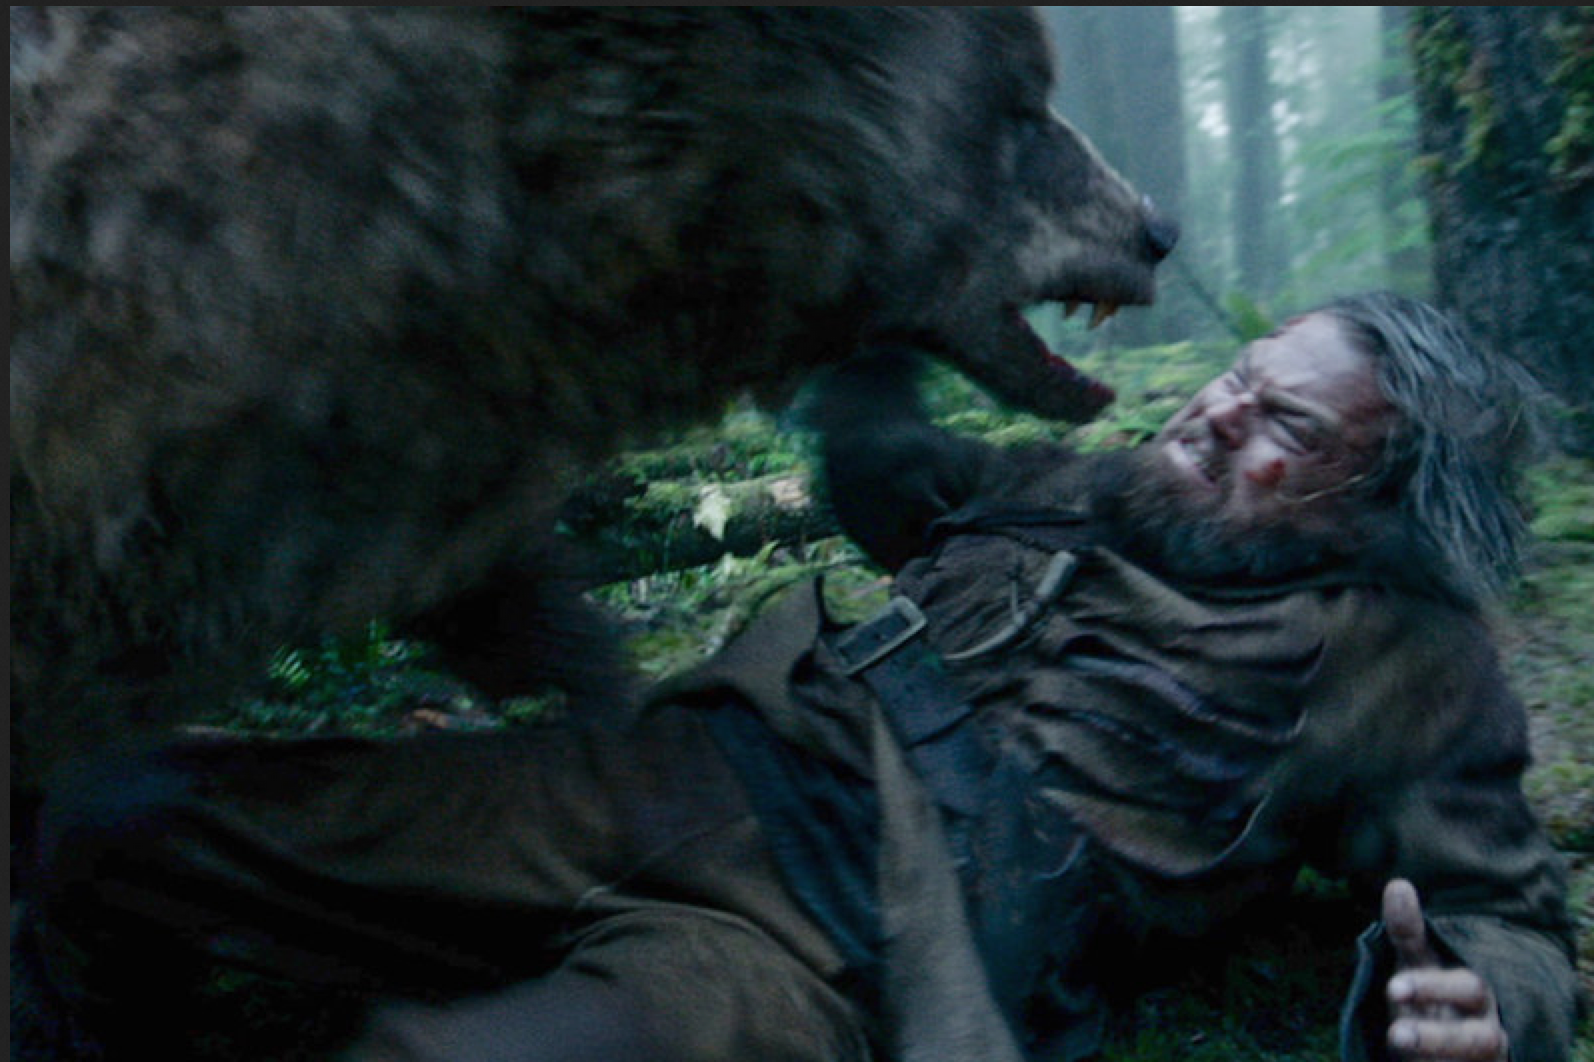 THE REVENANT: The Rest of The Story